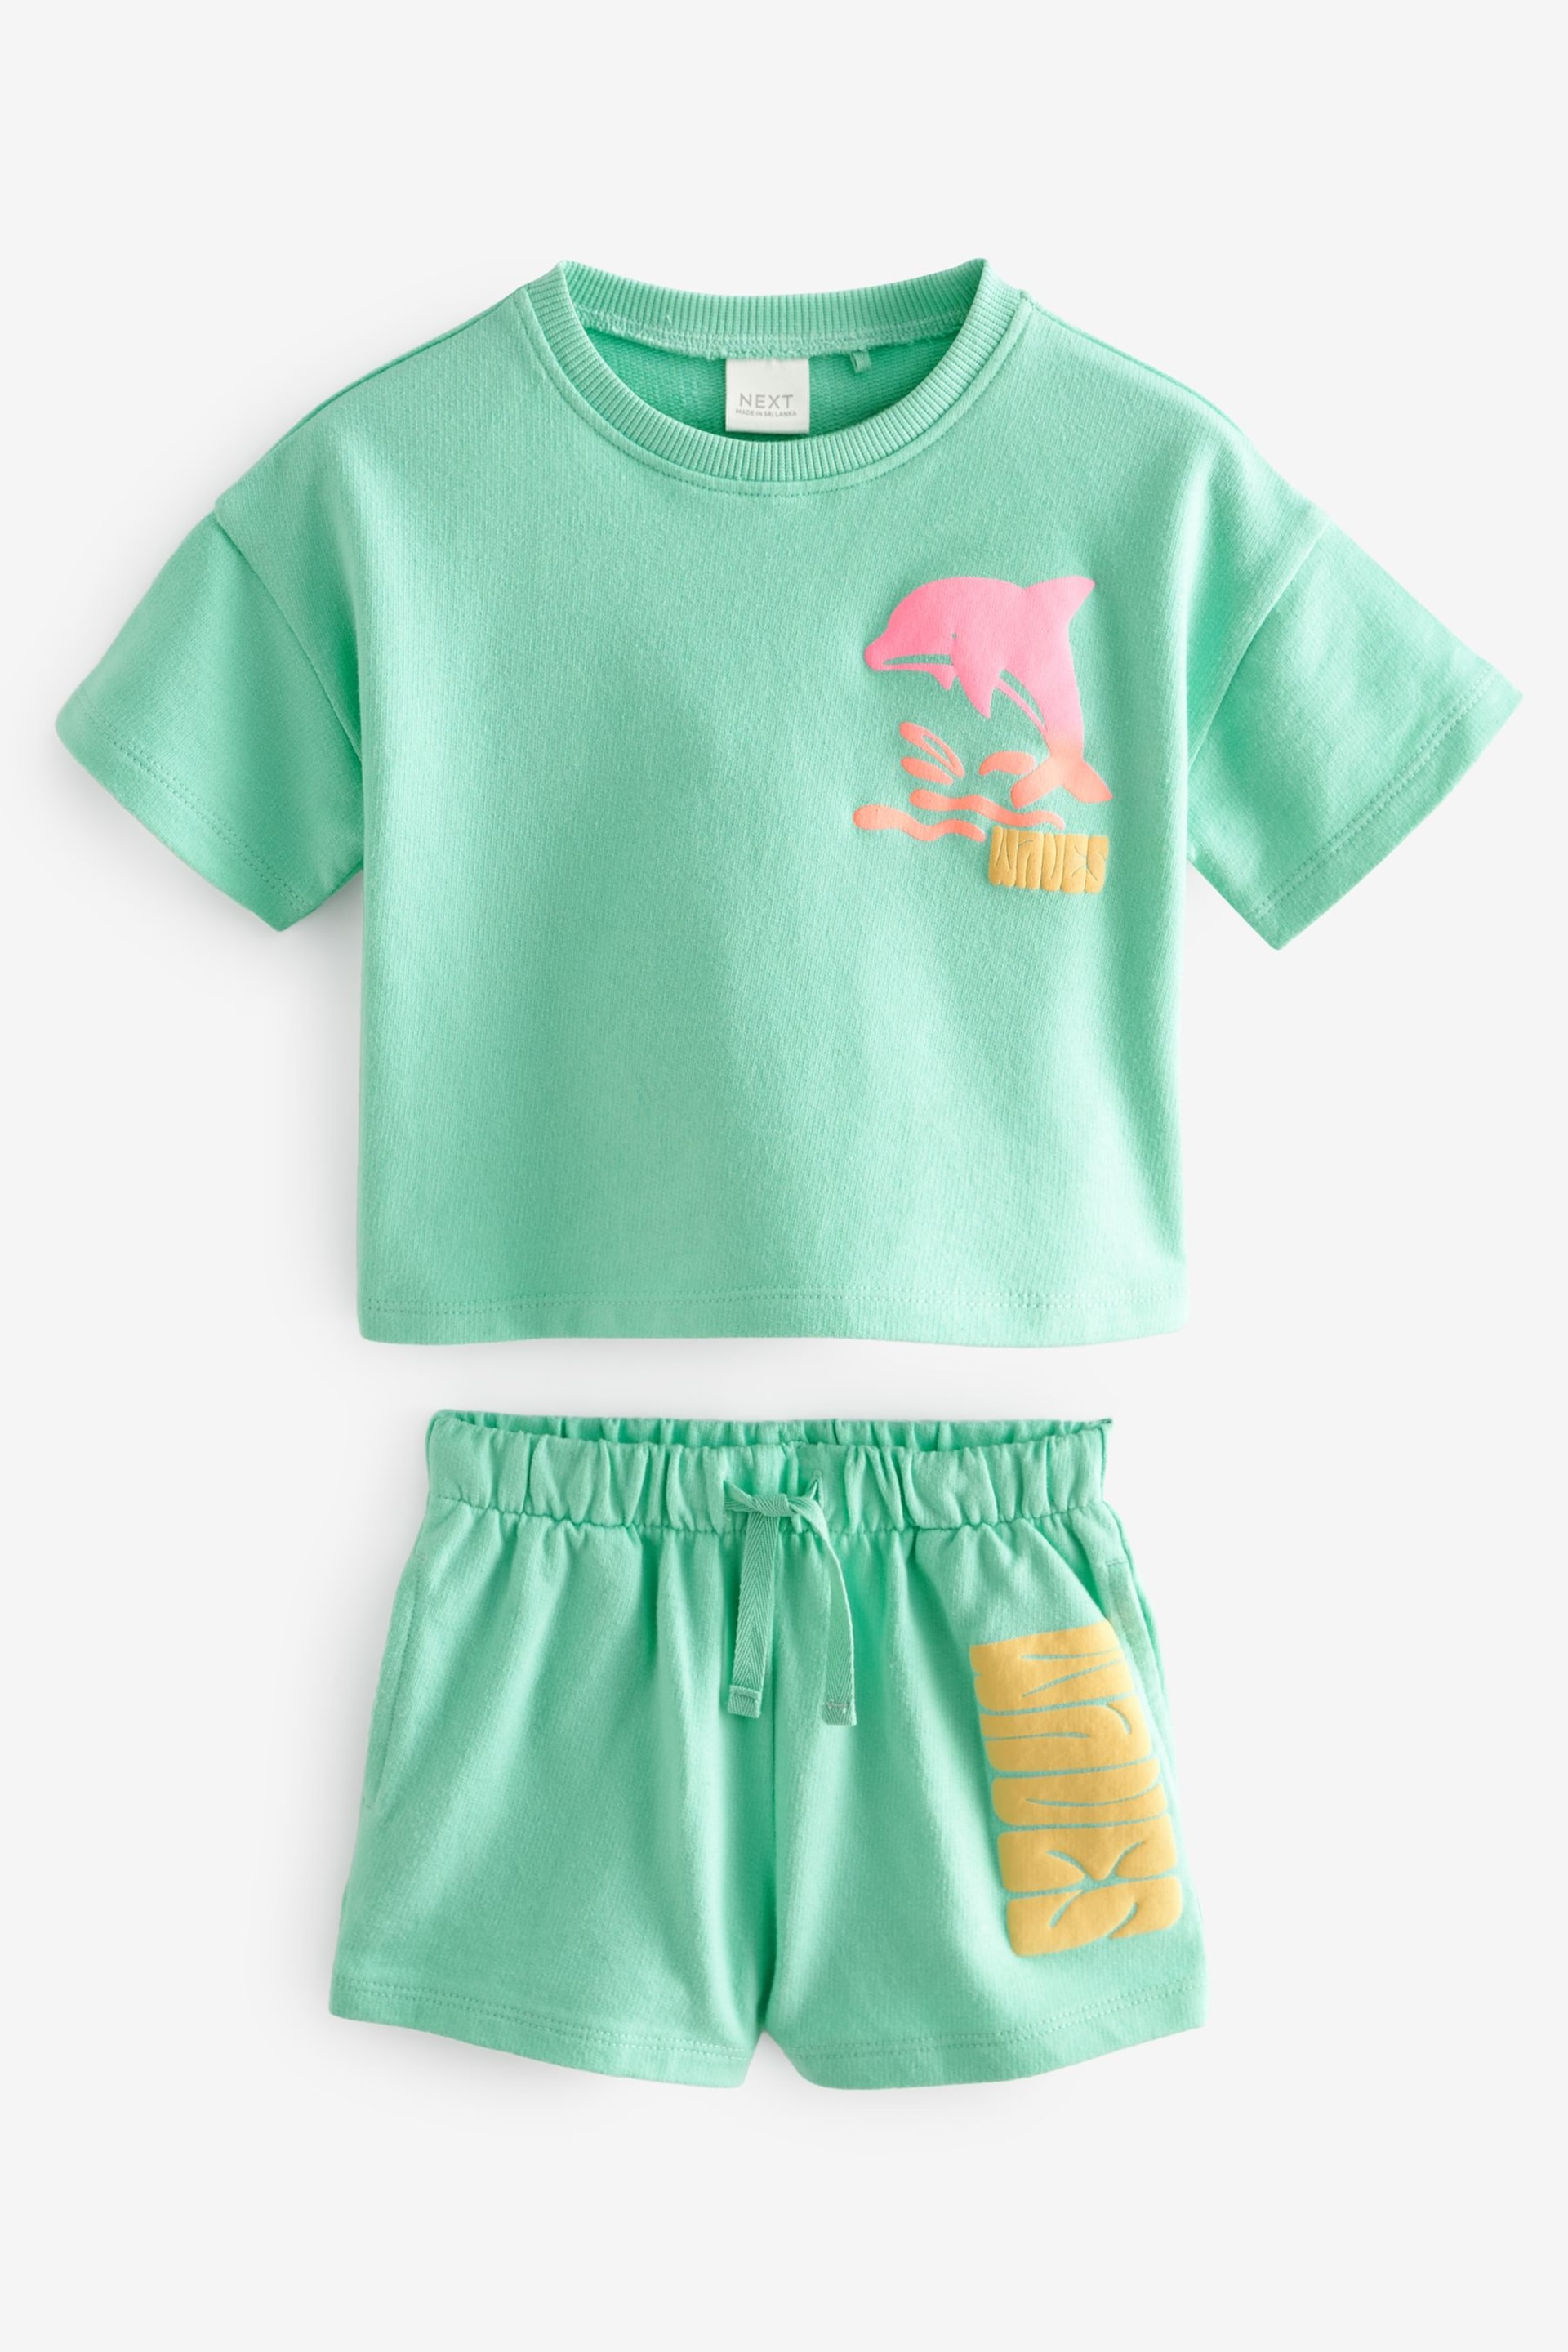 Green Dolphin T-Shirt And Shorts Set (3mths-7yrs) - Image 5 of 7